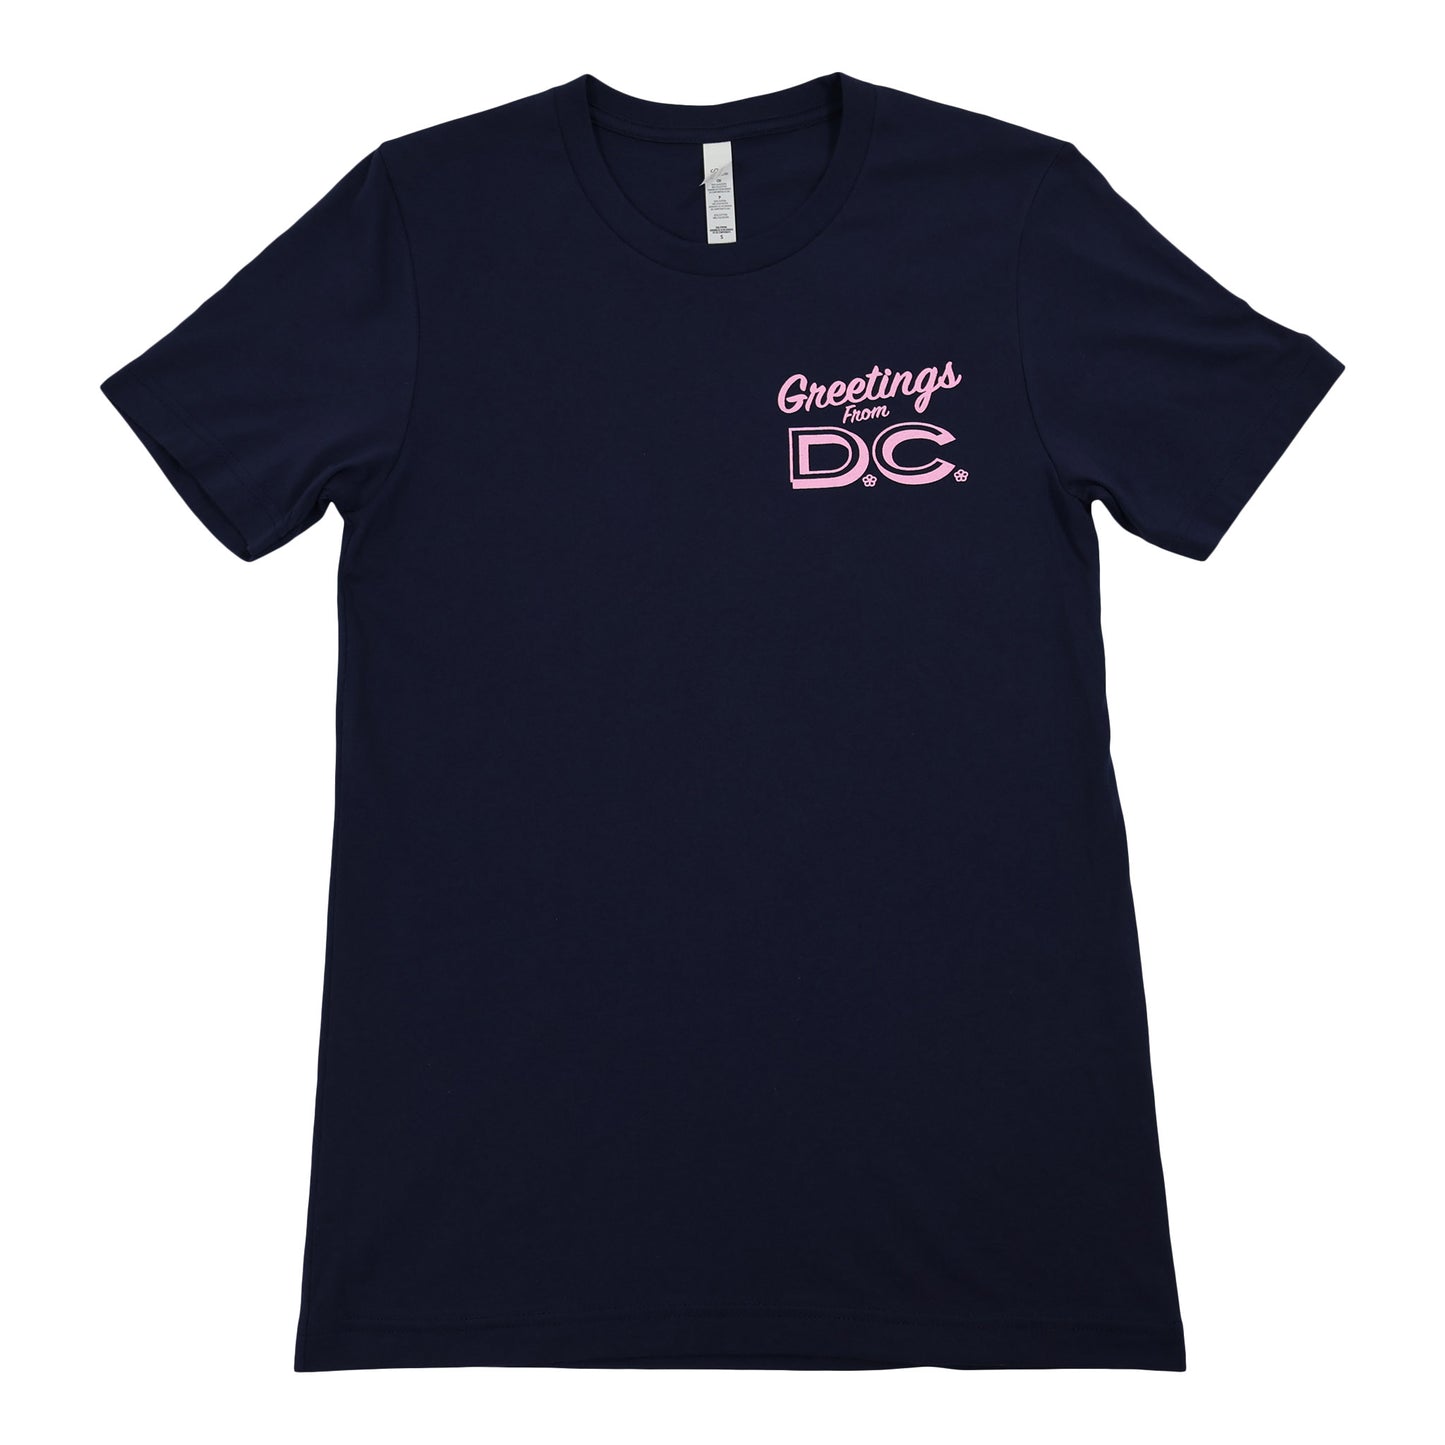 Unisex 'Greetings from DC' double-sided t-shirt